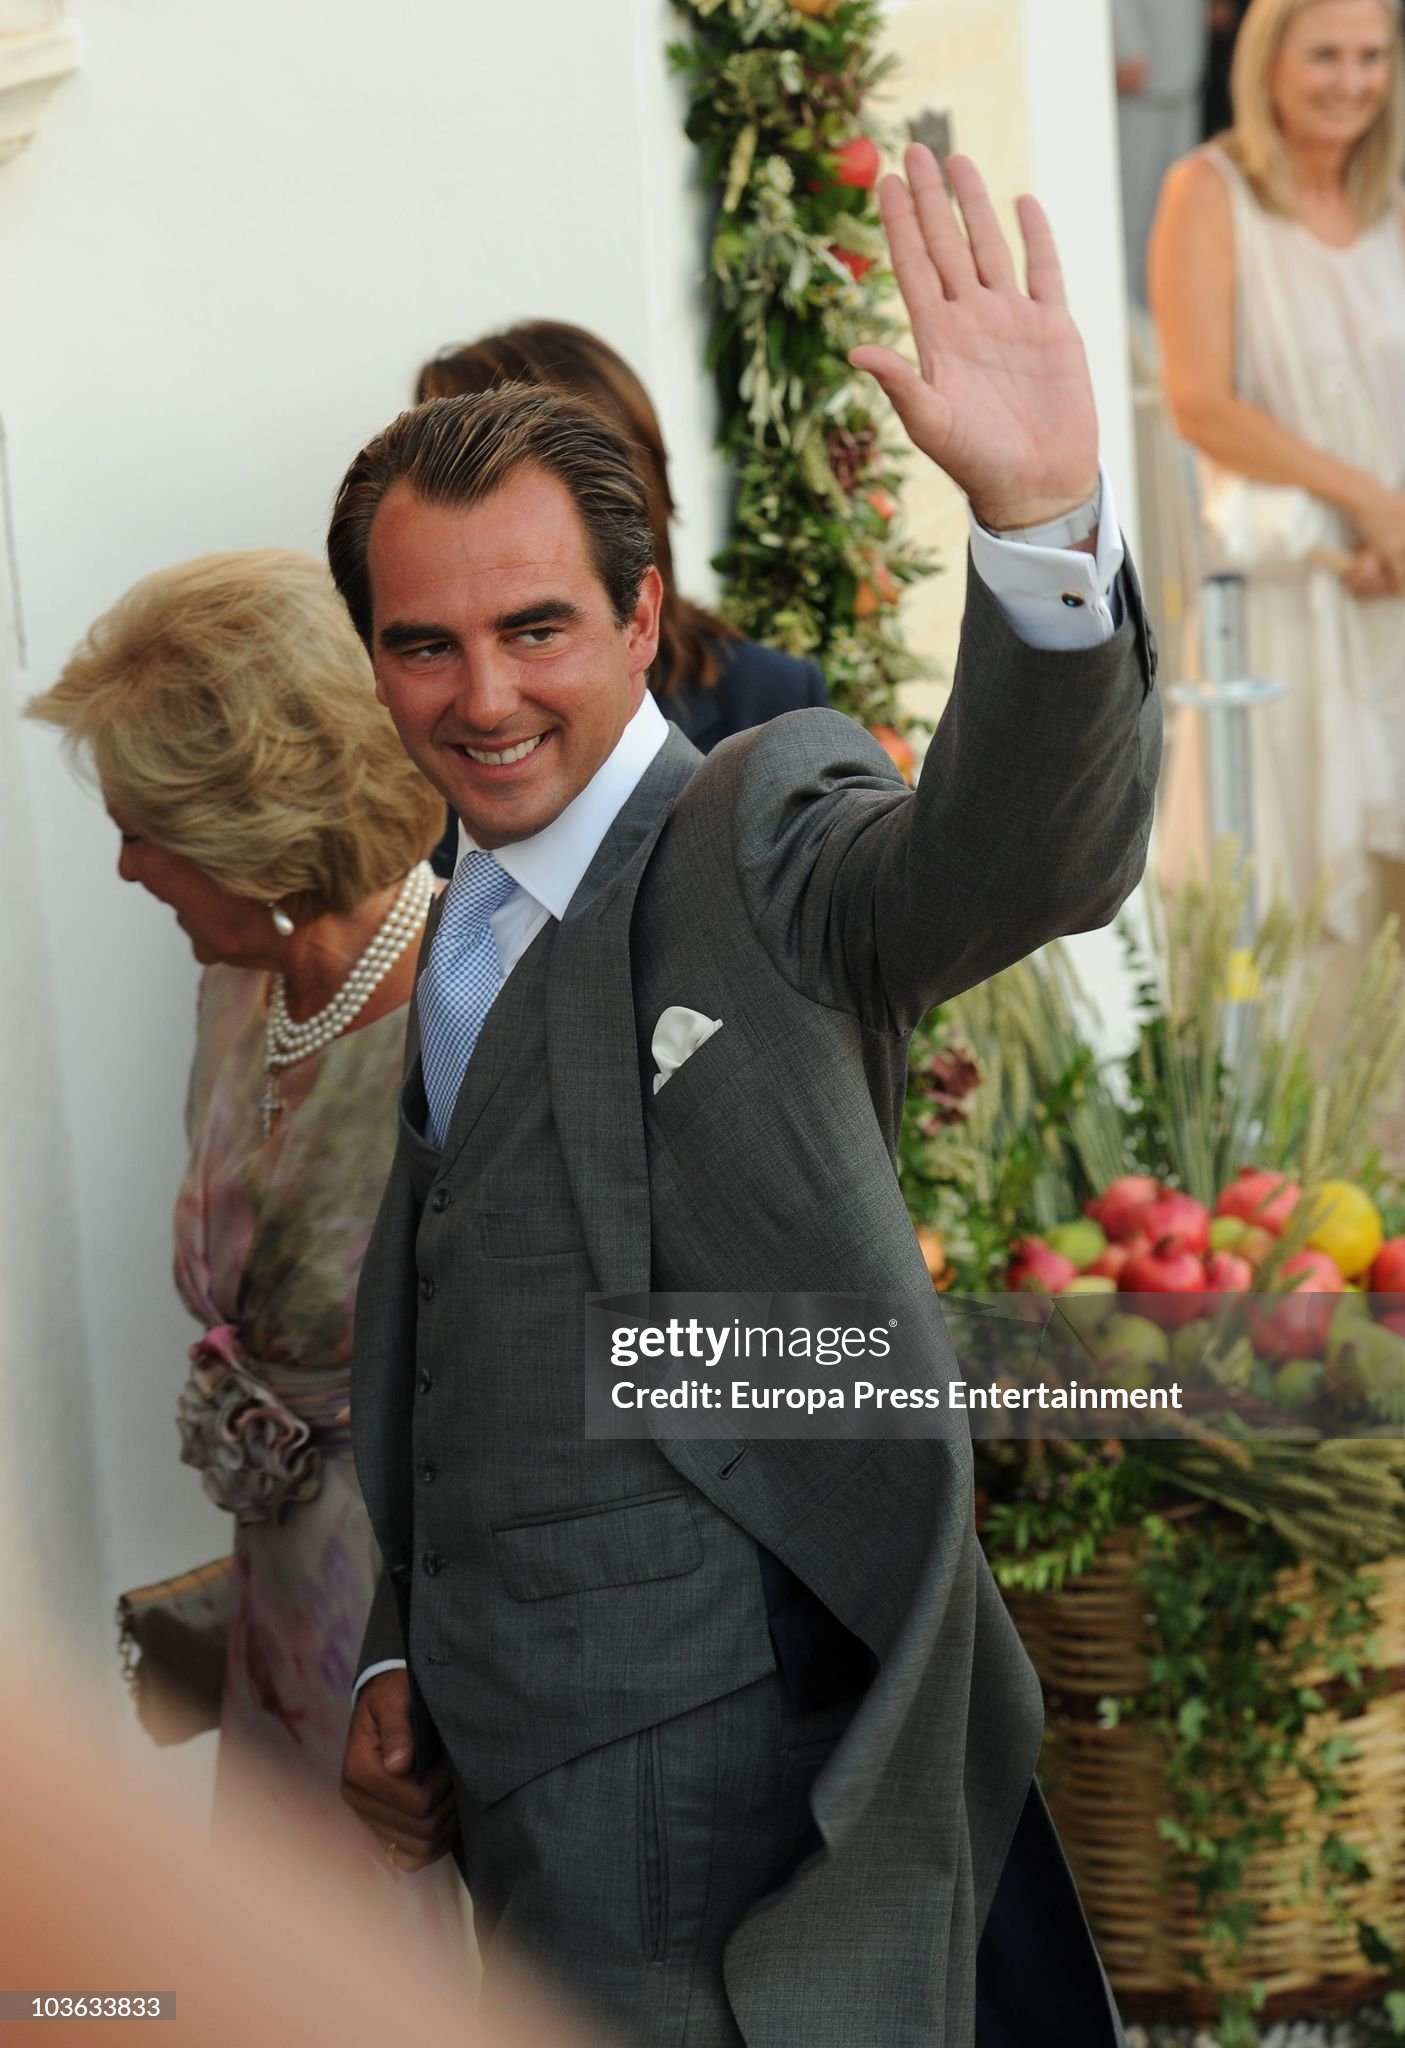 prince-nikolaos-of-greece-and-queen-anne-marie-of-greece-arrive-for-his-wedding-totatiana.jpg